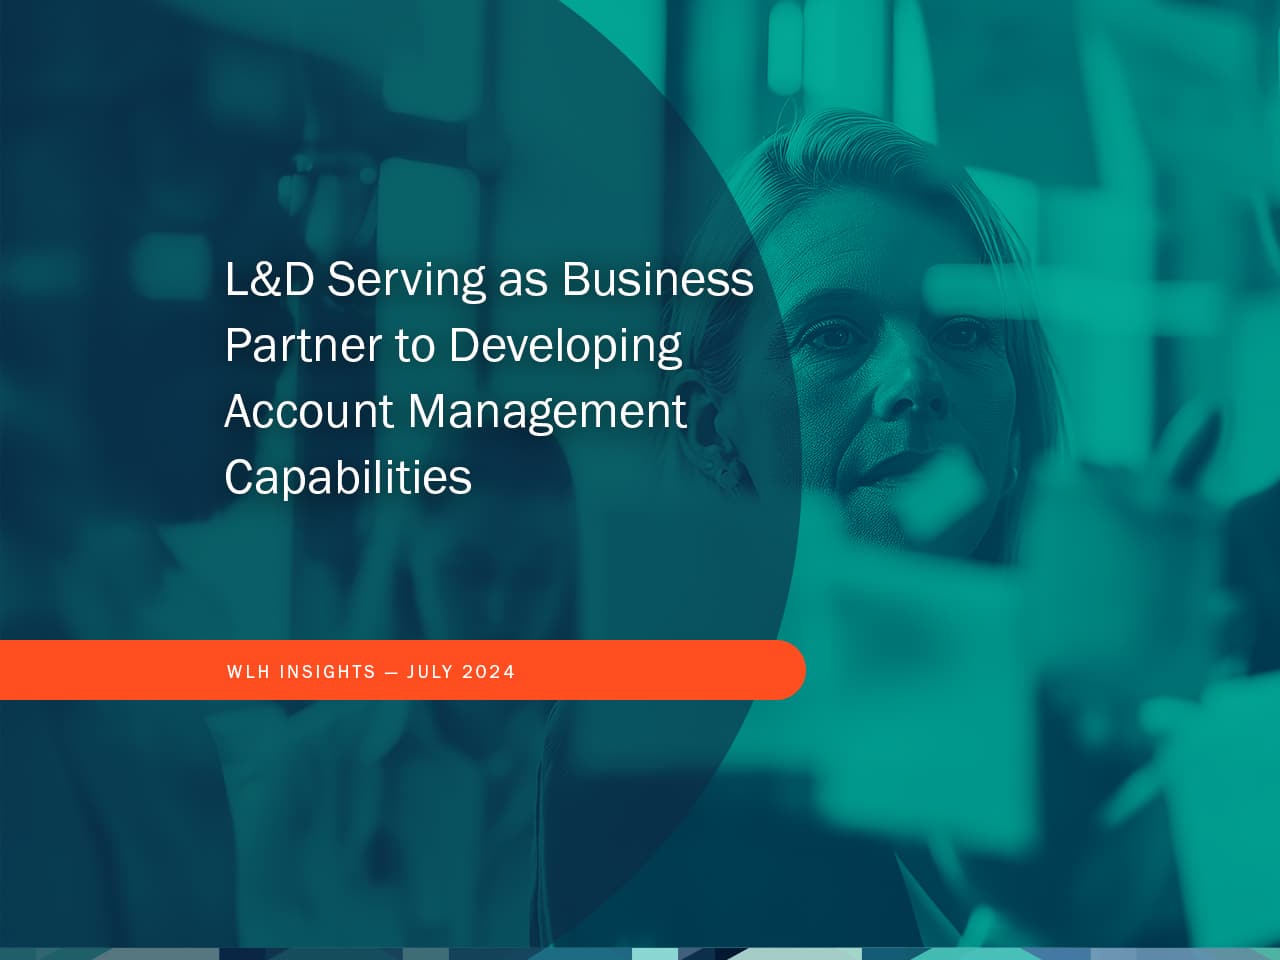 L&D Serving as Business Partner to Developing Account Management Capabilities